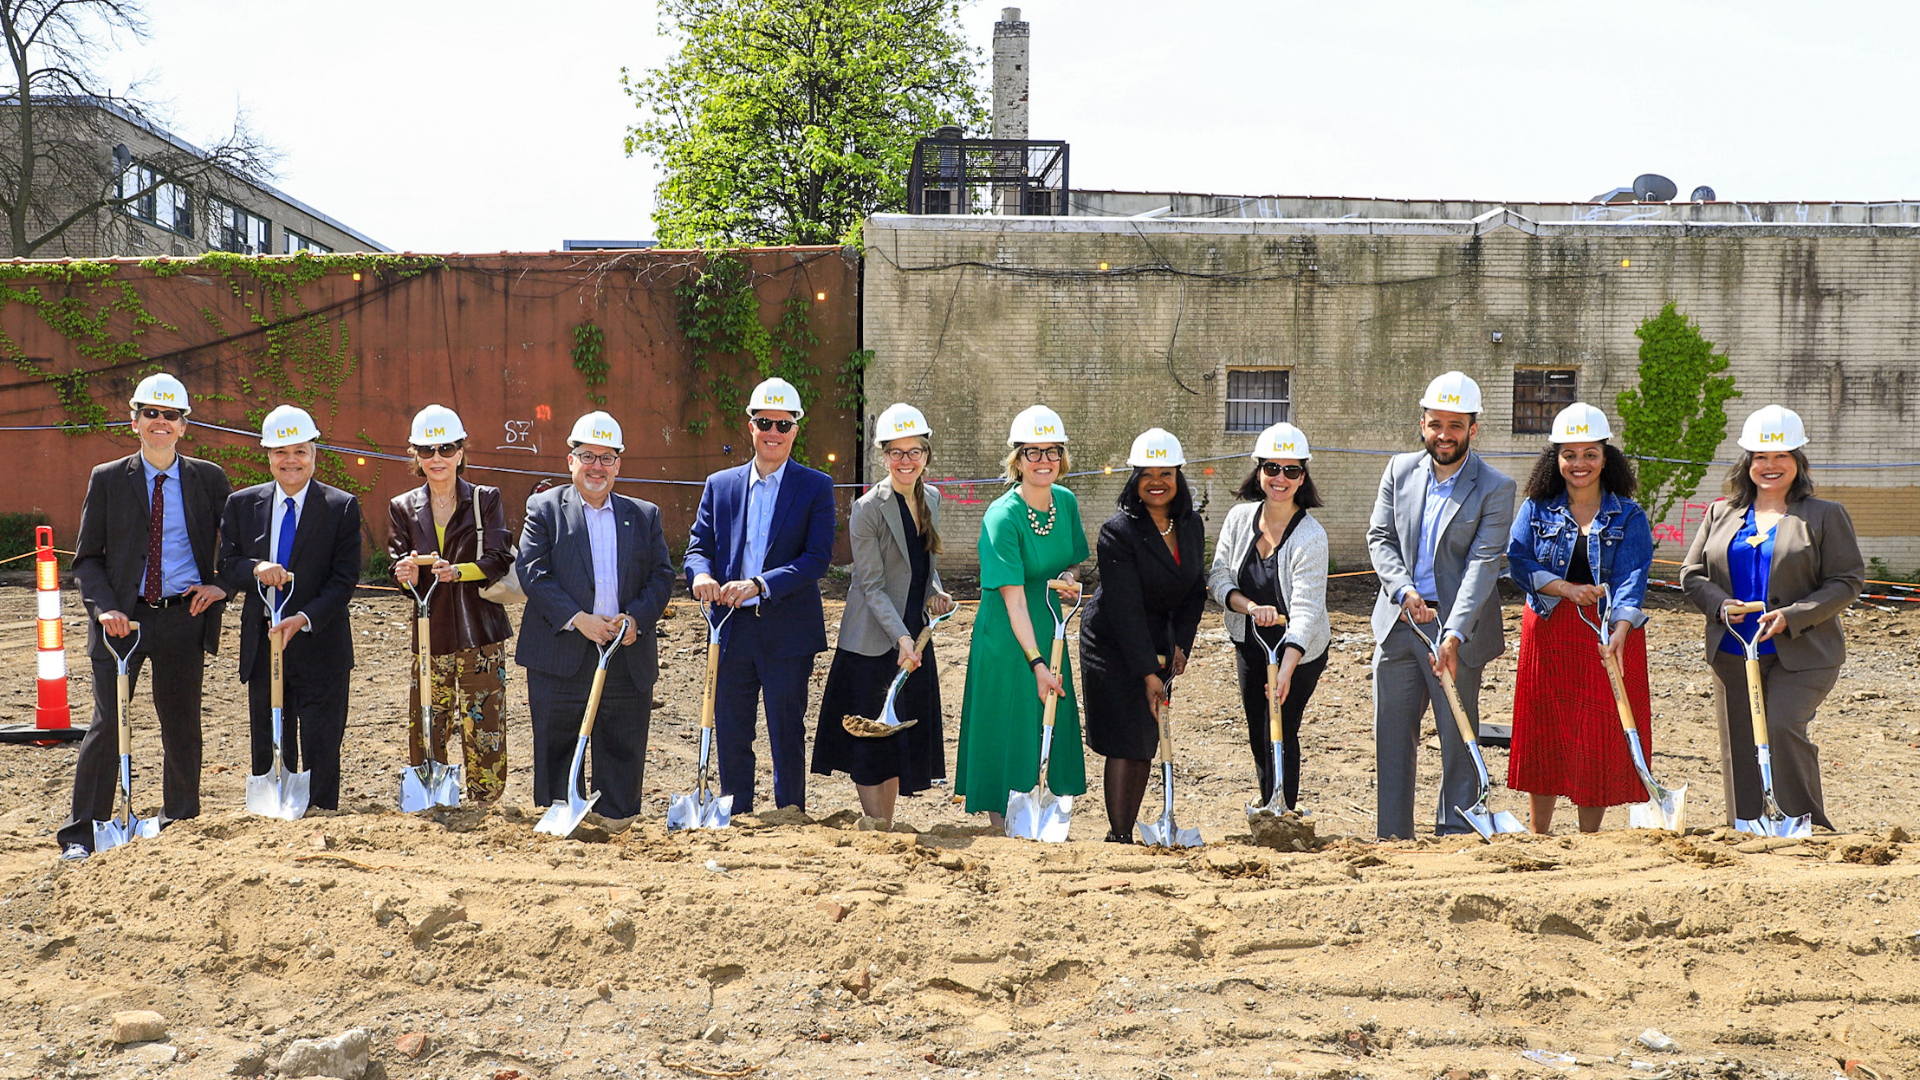 Phase 2 of Marcus Garvey extension project for extra affordable housing underway in Brownsville